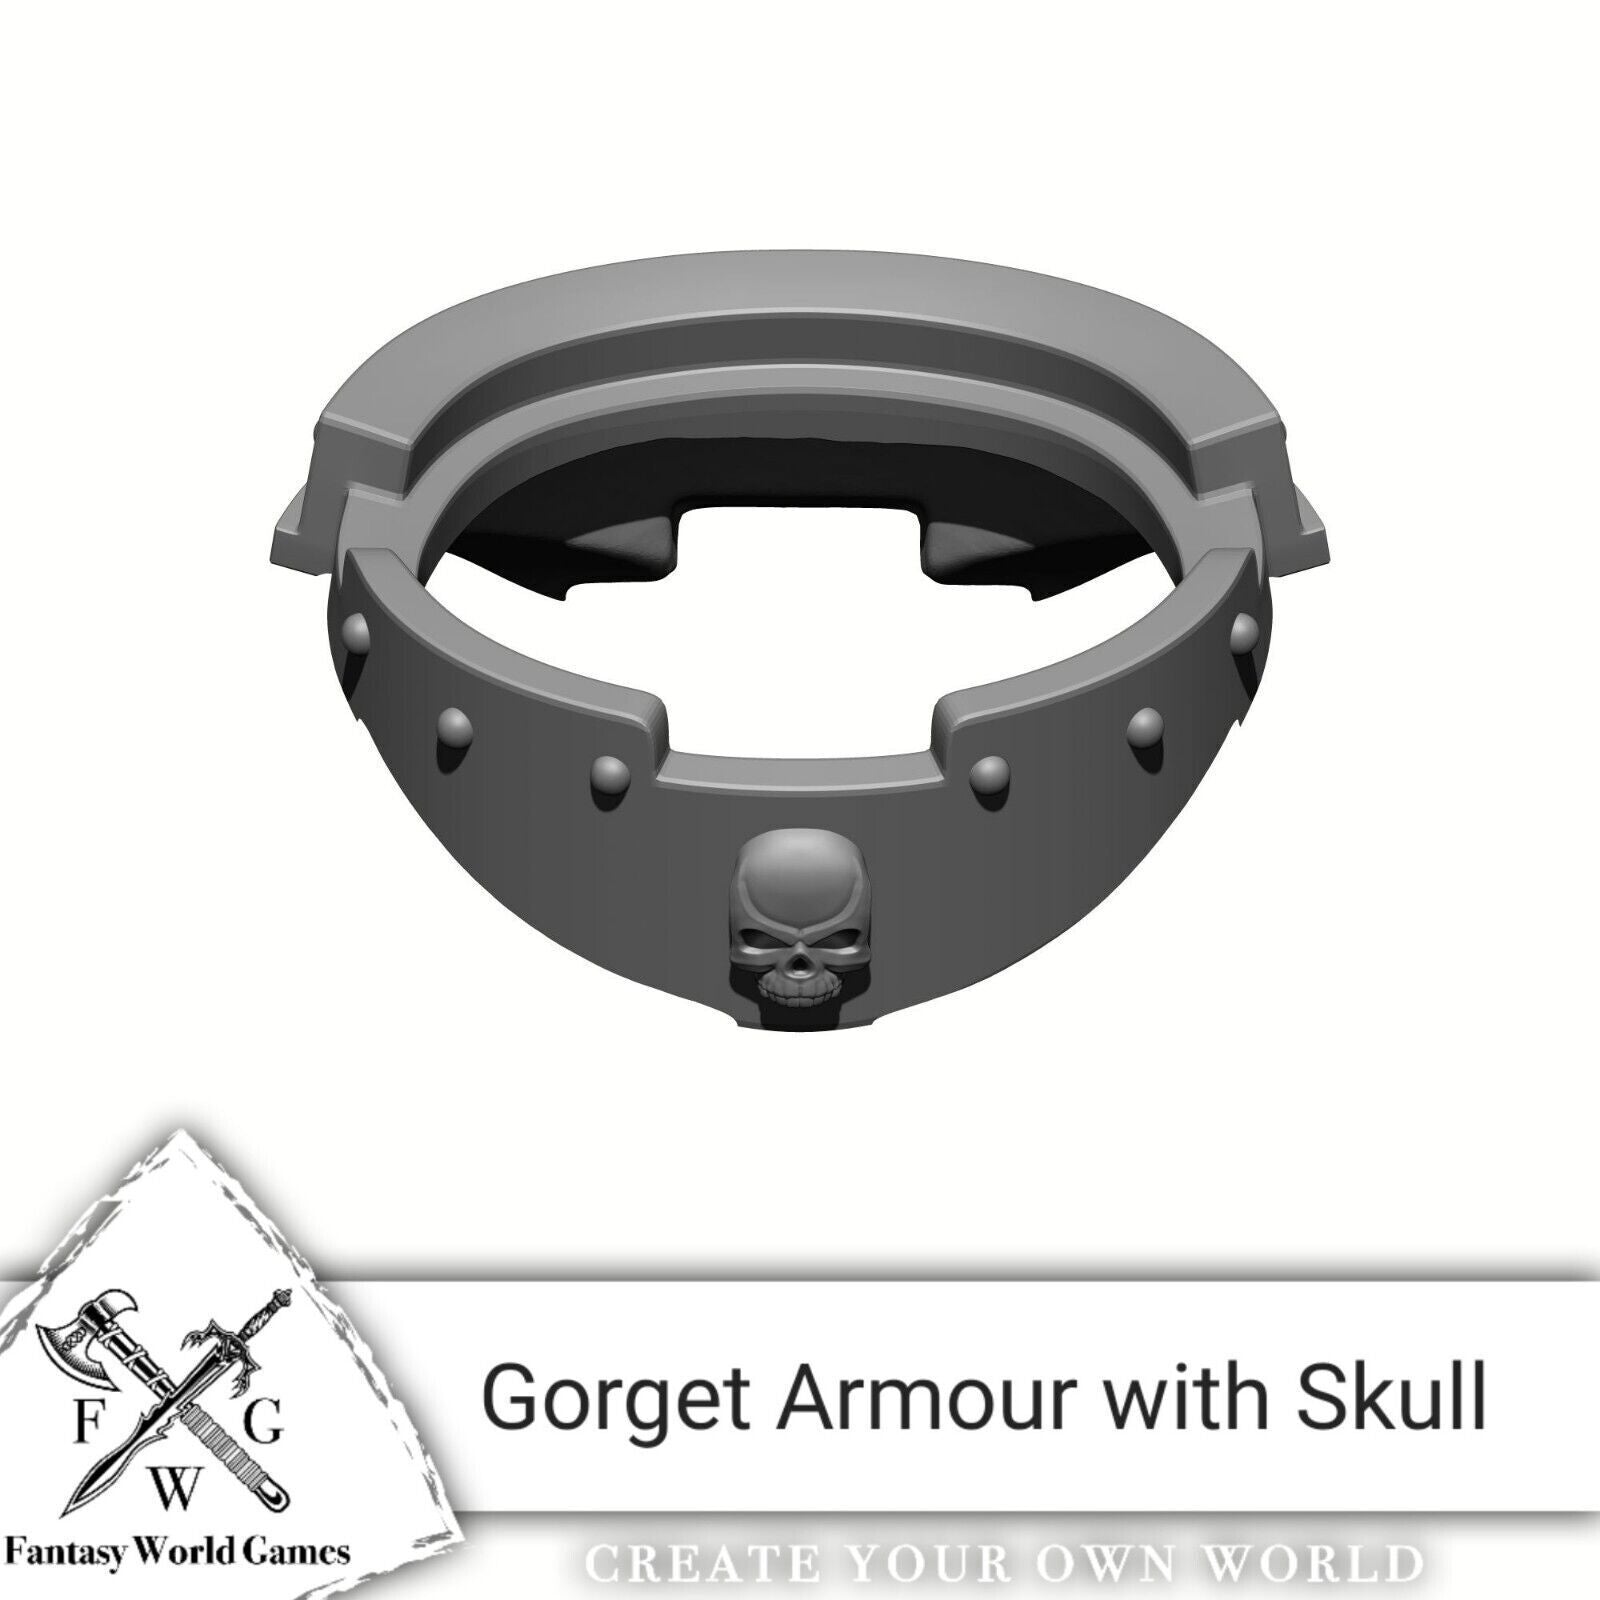 Customize your McFarlane Toys Space Mariine Shoulder Pad with the Armor - Gorget with Skull and Rivets